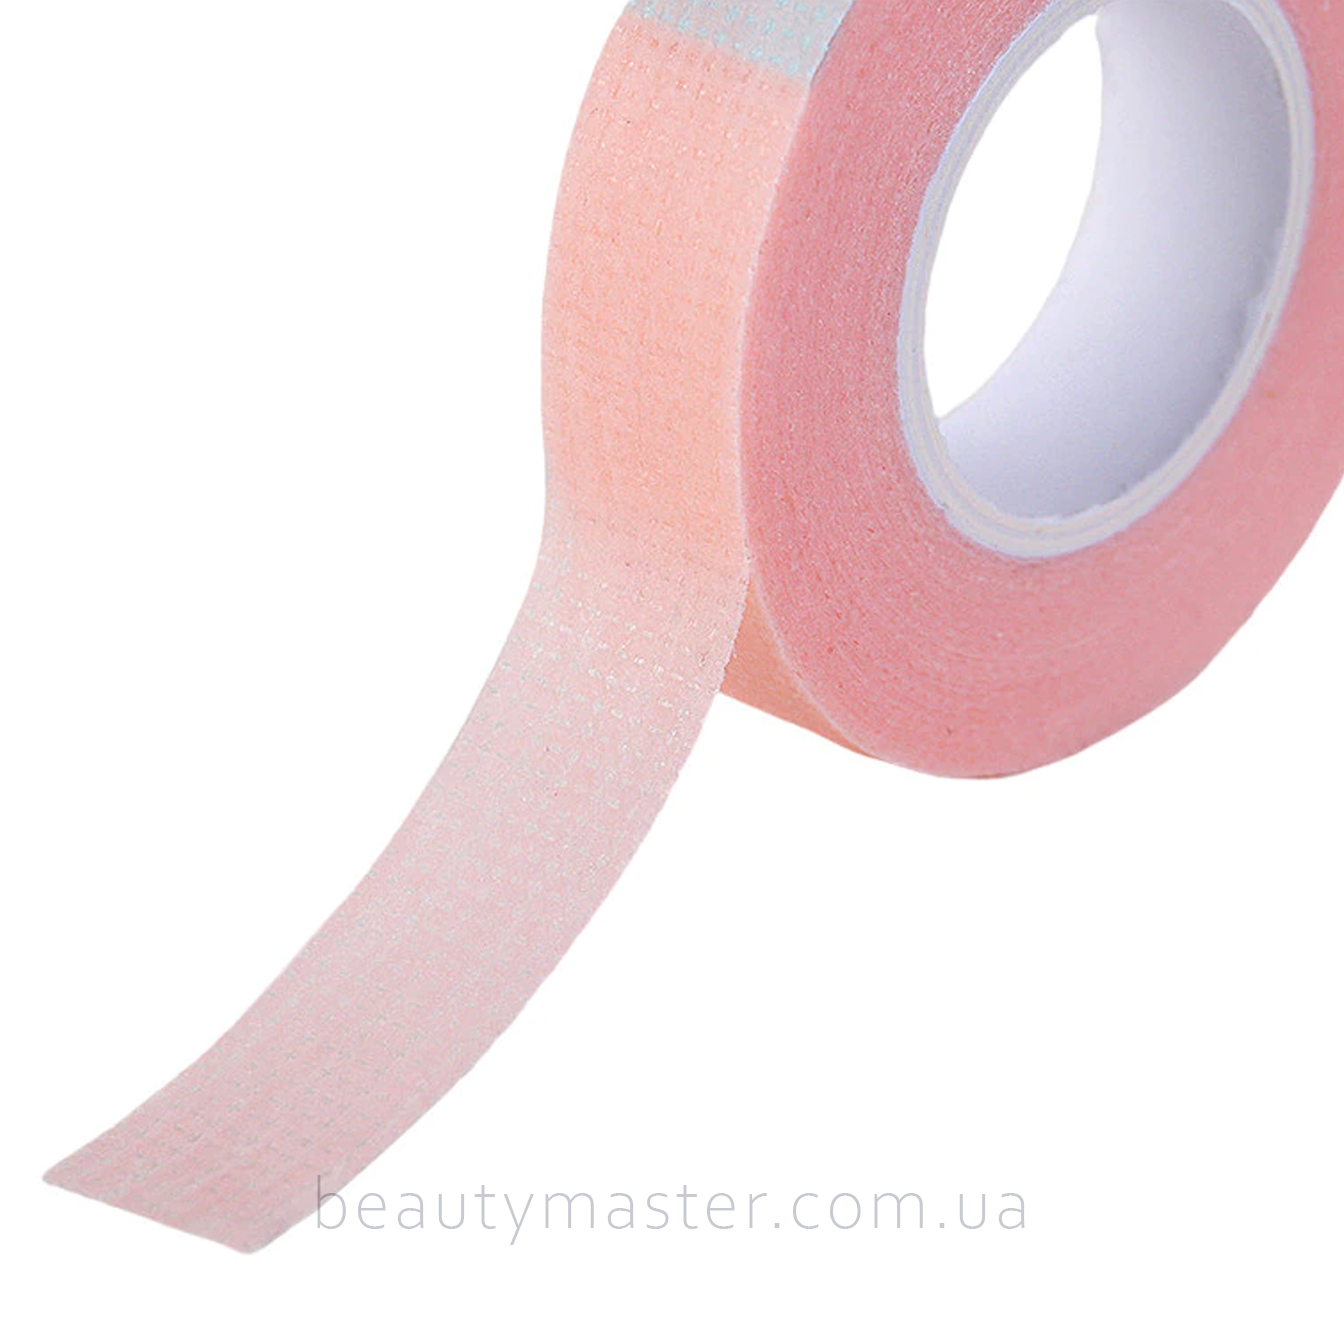 Tape (Scotch) for lower eyelashes in the range of non-woven fabric